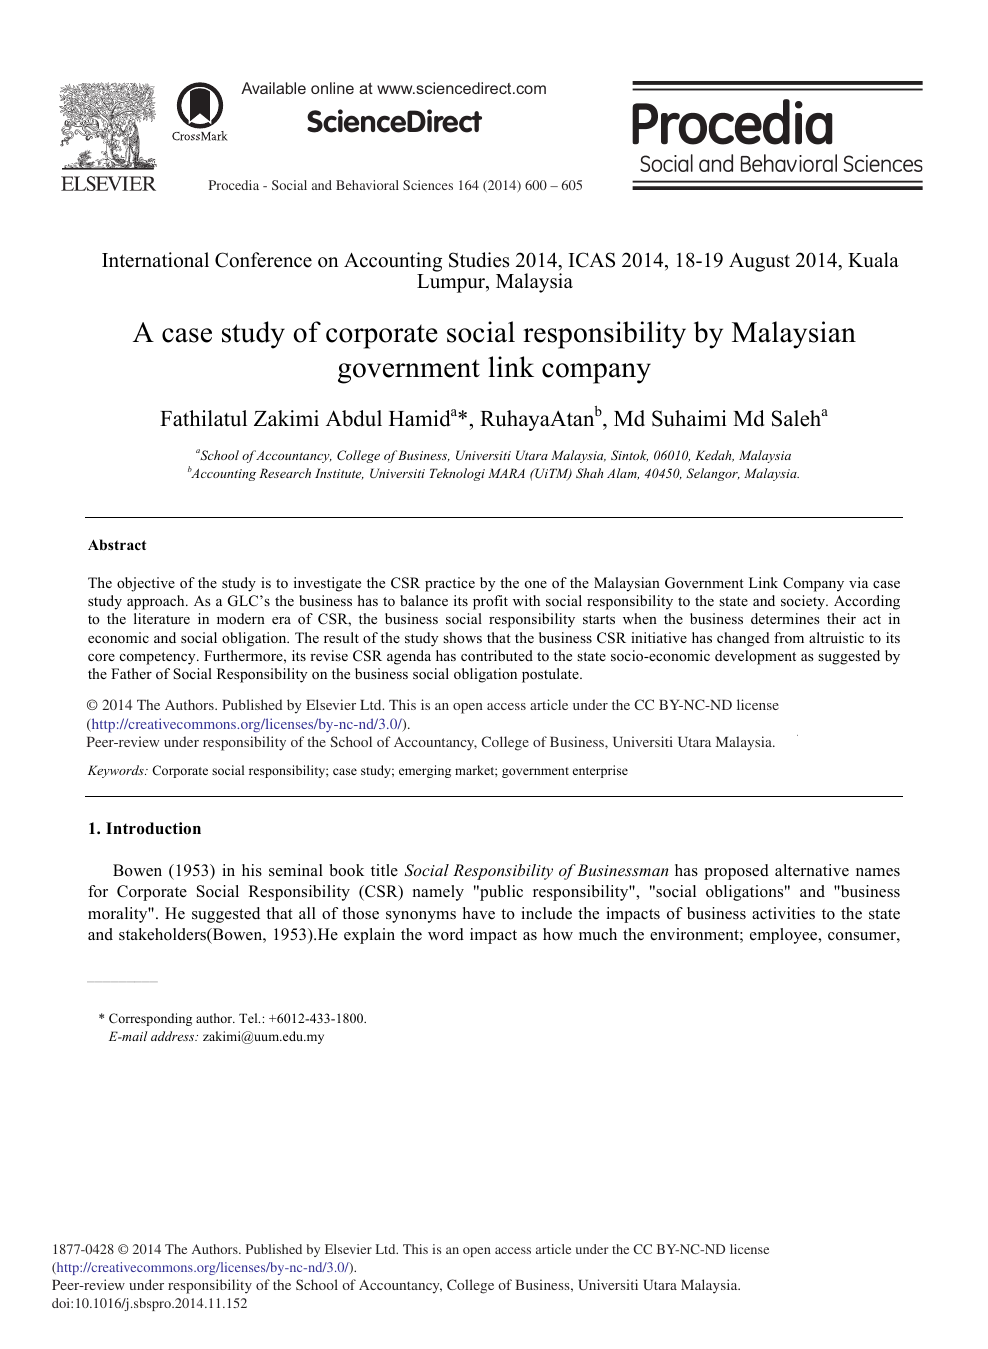 A Case Study Of Corporate Social Responsibility By Malaysian Government Link Company Topic Of Research Paper In Economics And Business Download Scholarly Article Pdf And Read For Free On Cyberleninka Open